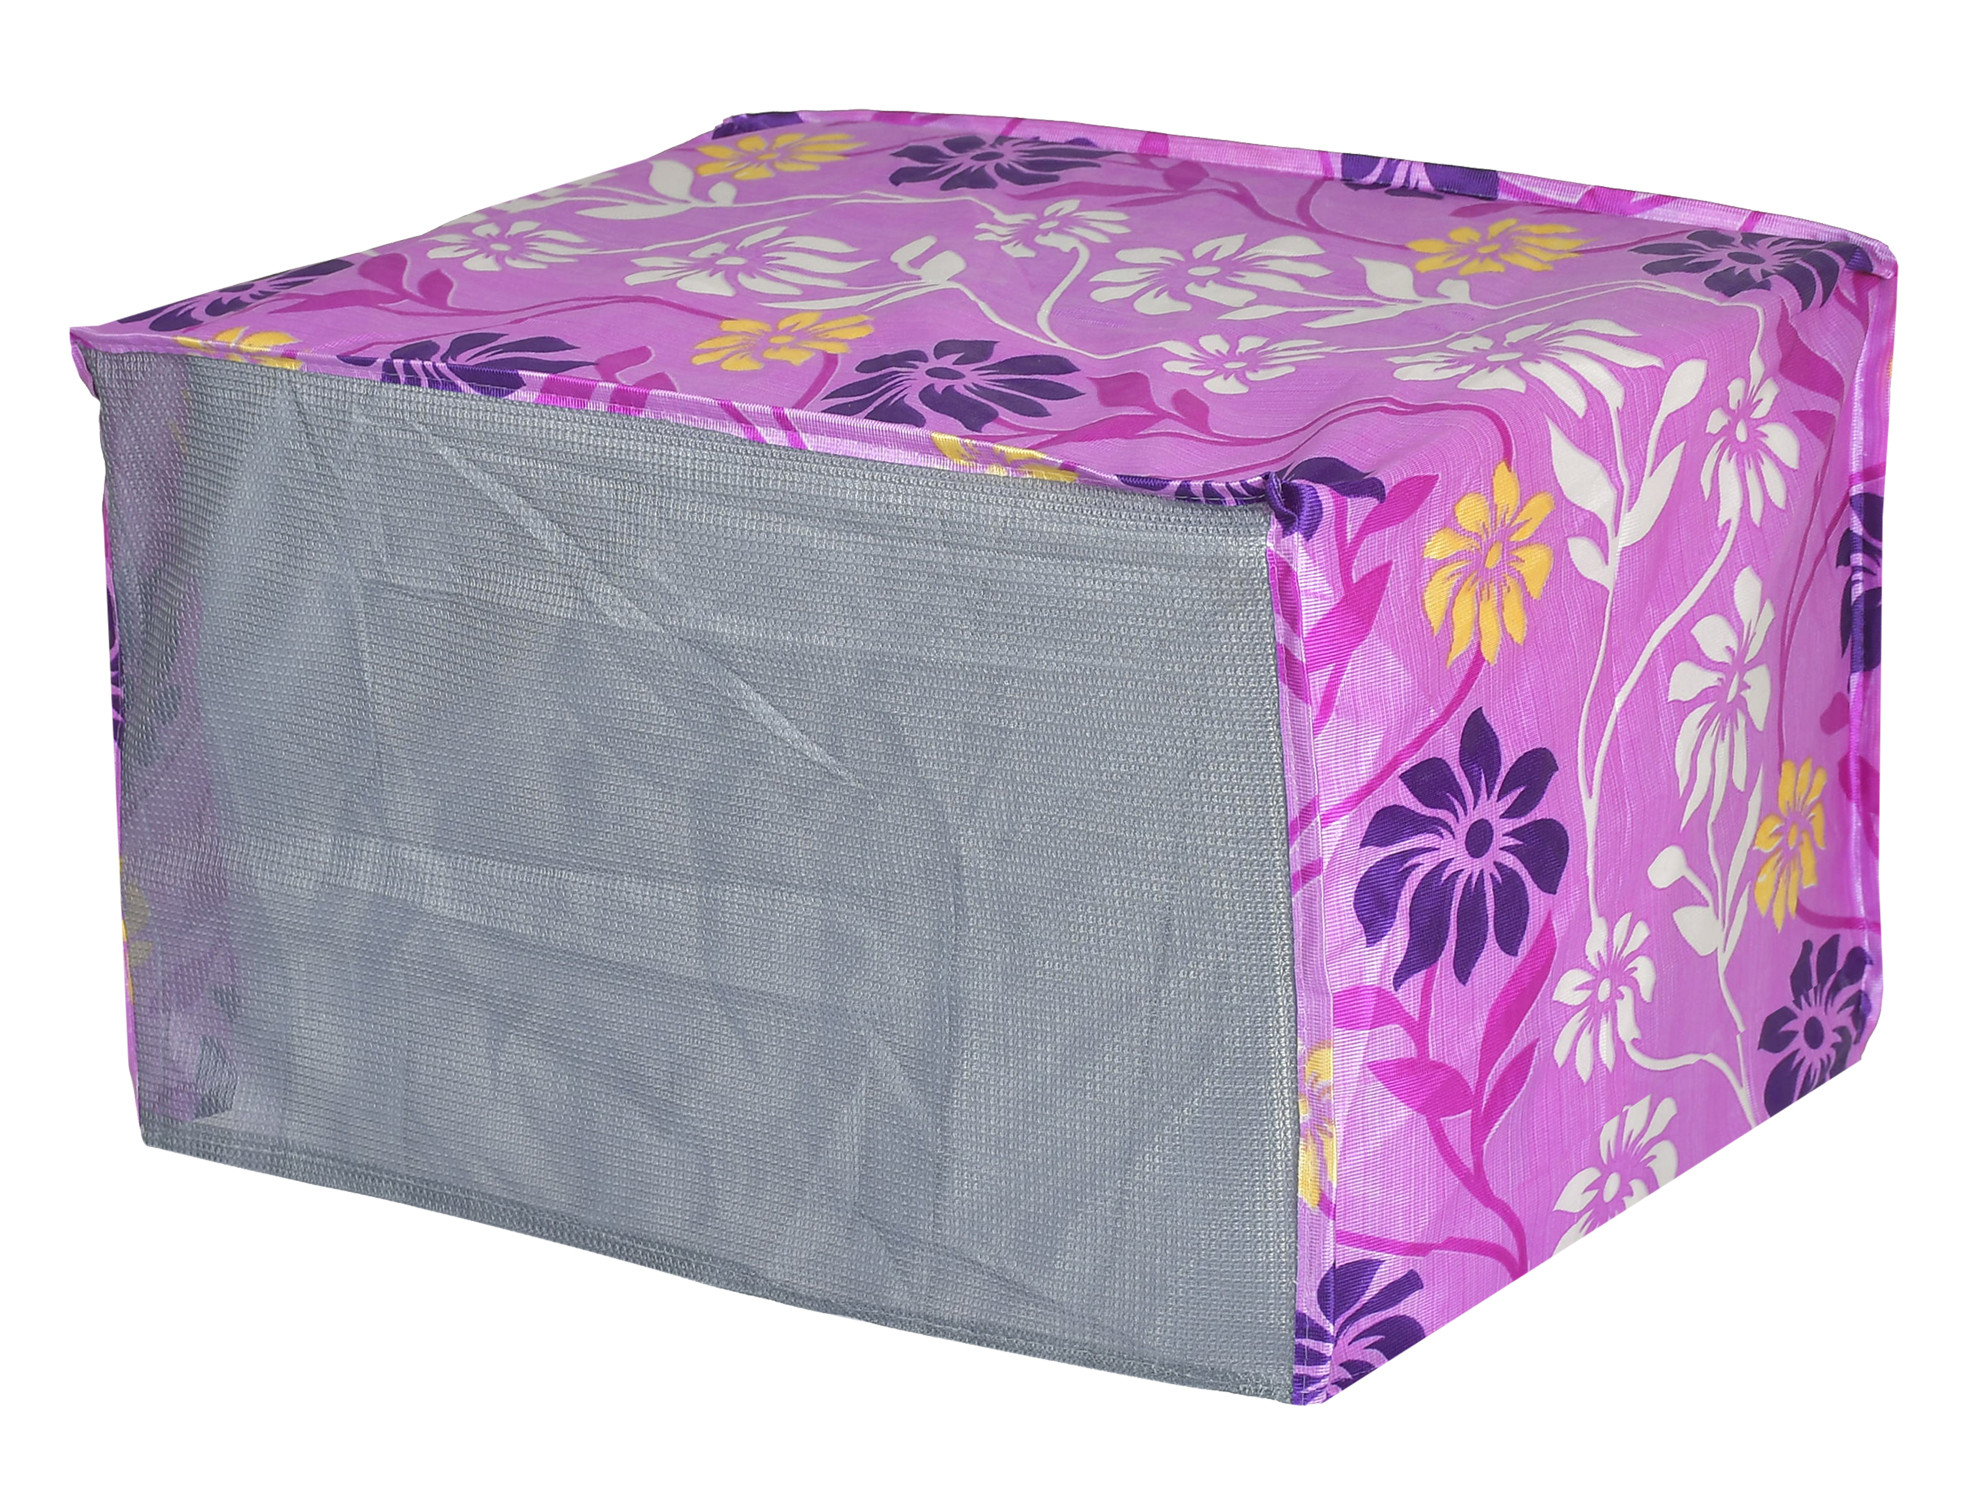 Kuber Industries Polyster Flower Printed Microwave Oven Cover,25 Ltr. (Pink)-HS43KUBMART25909